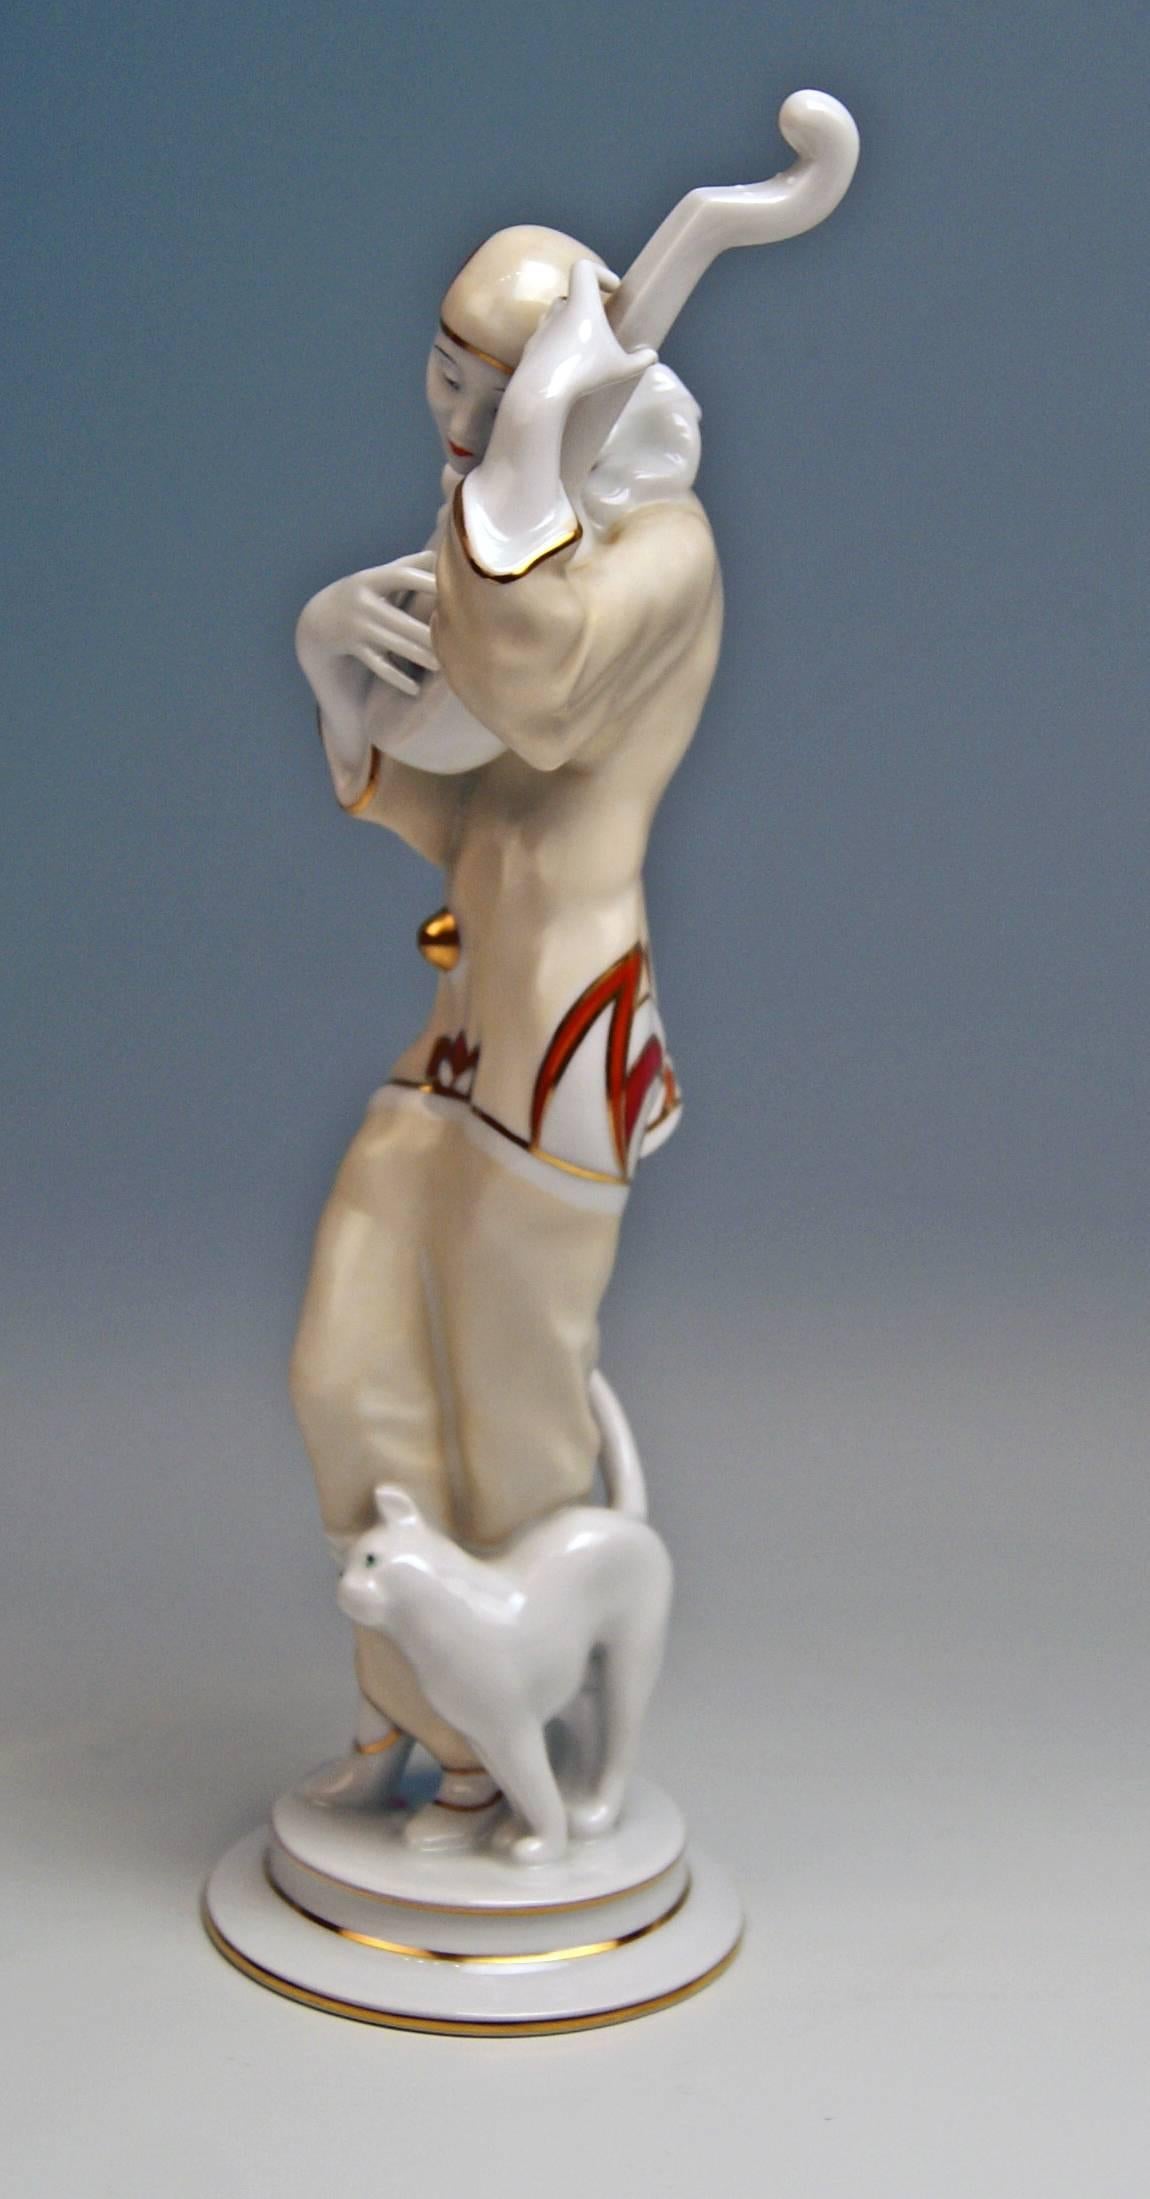 Rosenthal rarest Art Deco figurine of a Pierrot:
A gorgeous rarest Pierrot figurine - called 'Ash Wednesday' - wearing a Pierrot's costume (ruff, cap, a loose-fit shirt and trousers) plays the lute / a lovely cat nuzzles up against Pierrot's legs.